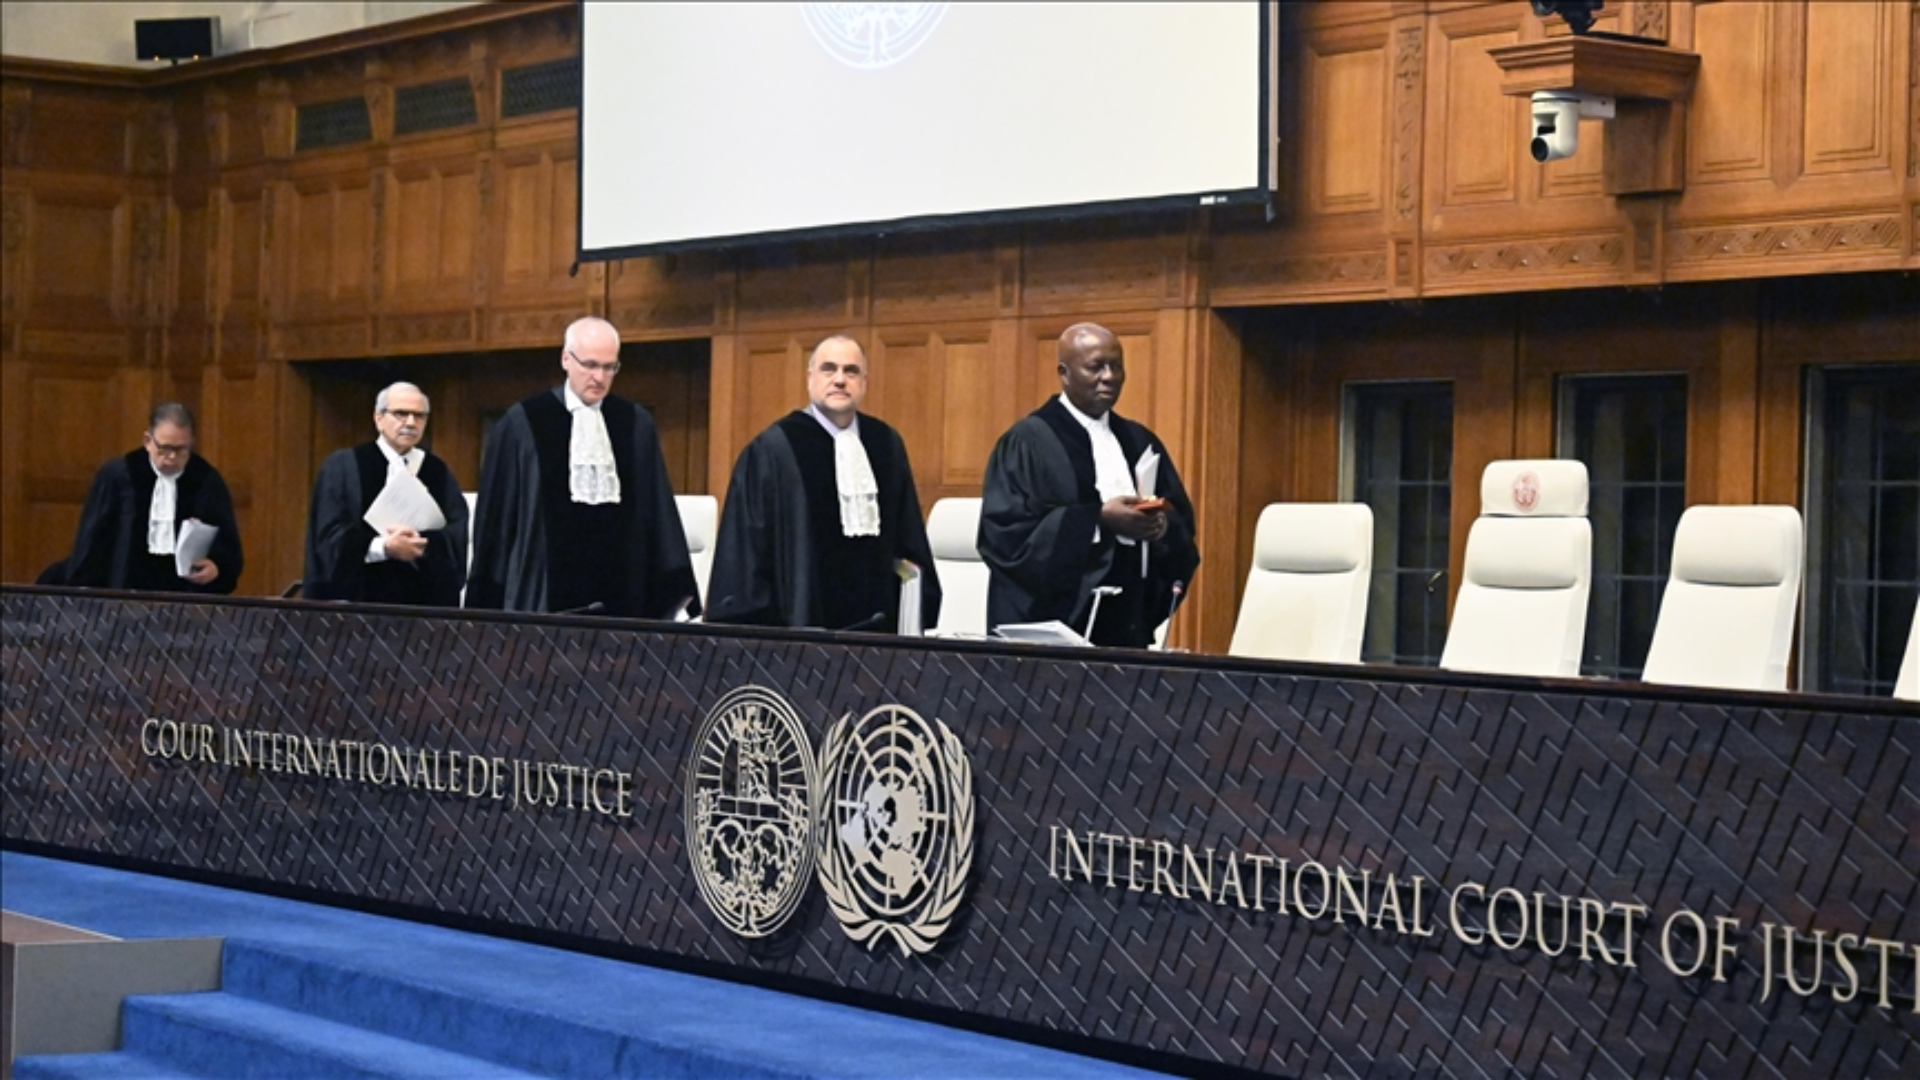 South Africa Calls On International Court Of Justice To Enforce Gaza Ceasefire, Halt Israel’s Operations In Rafah